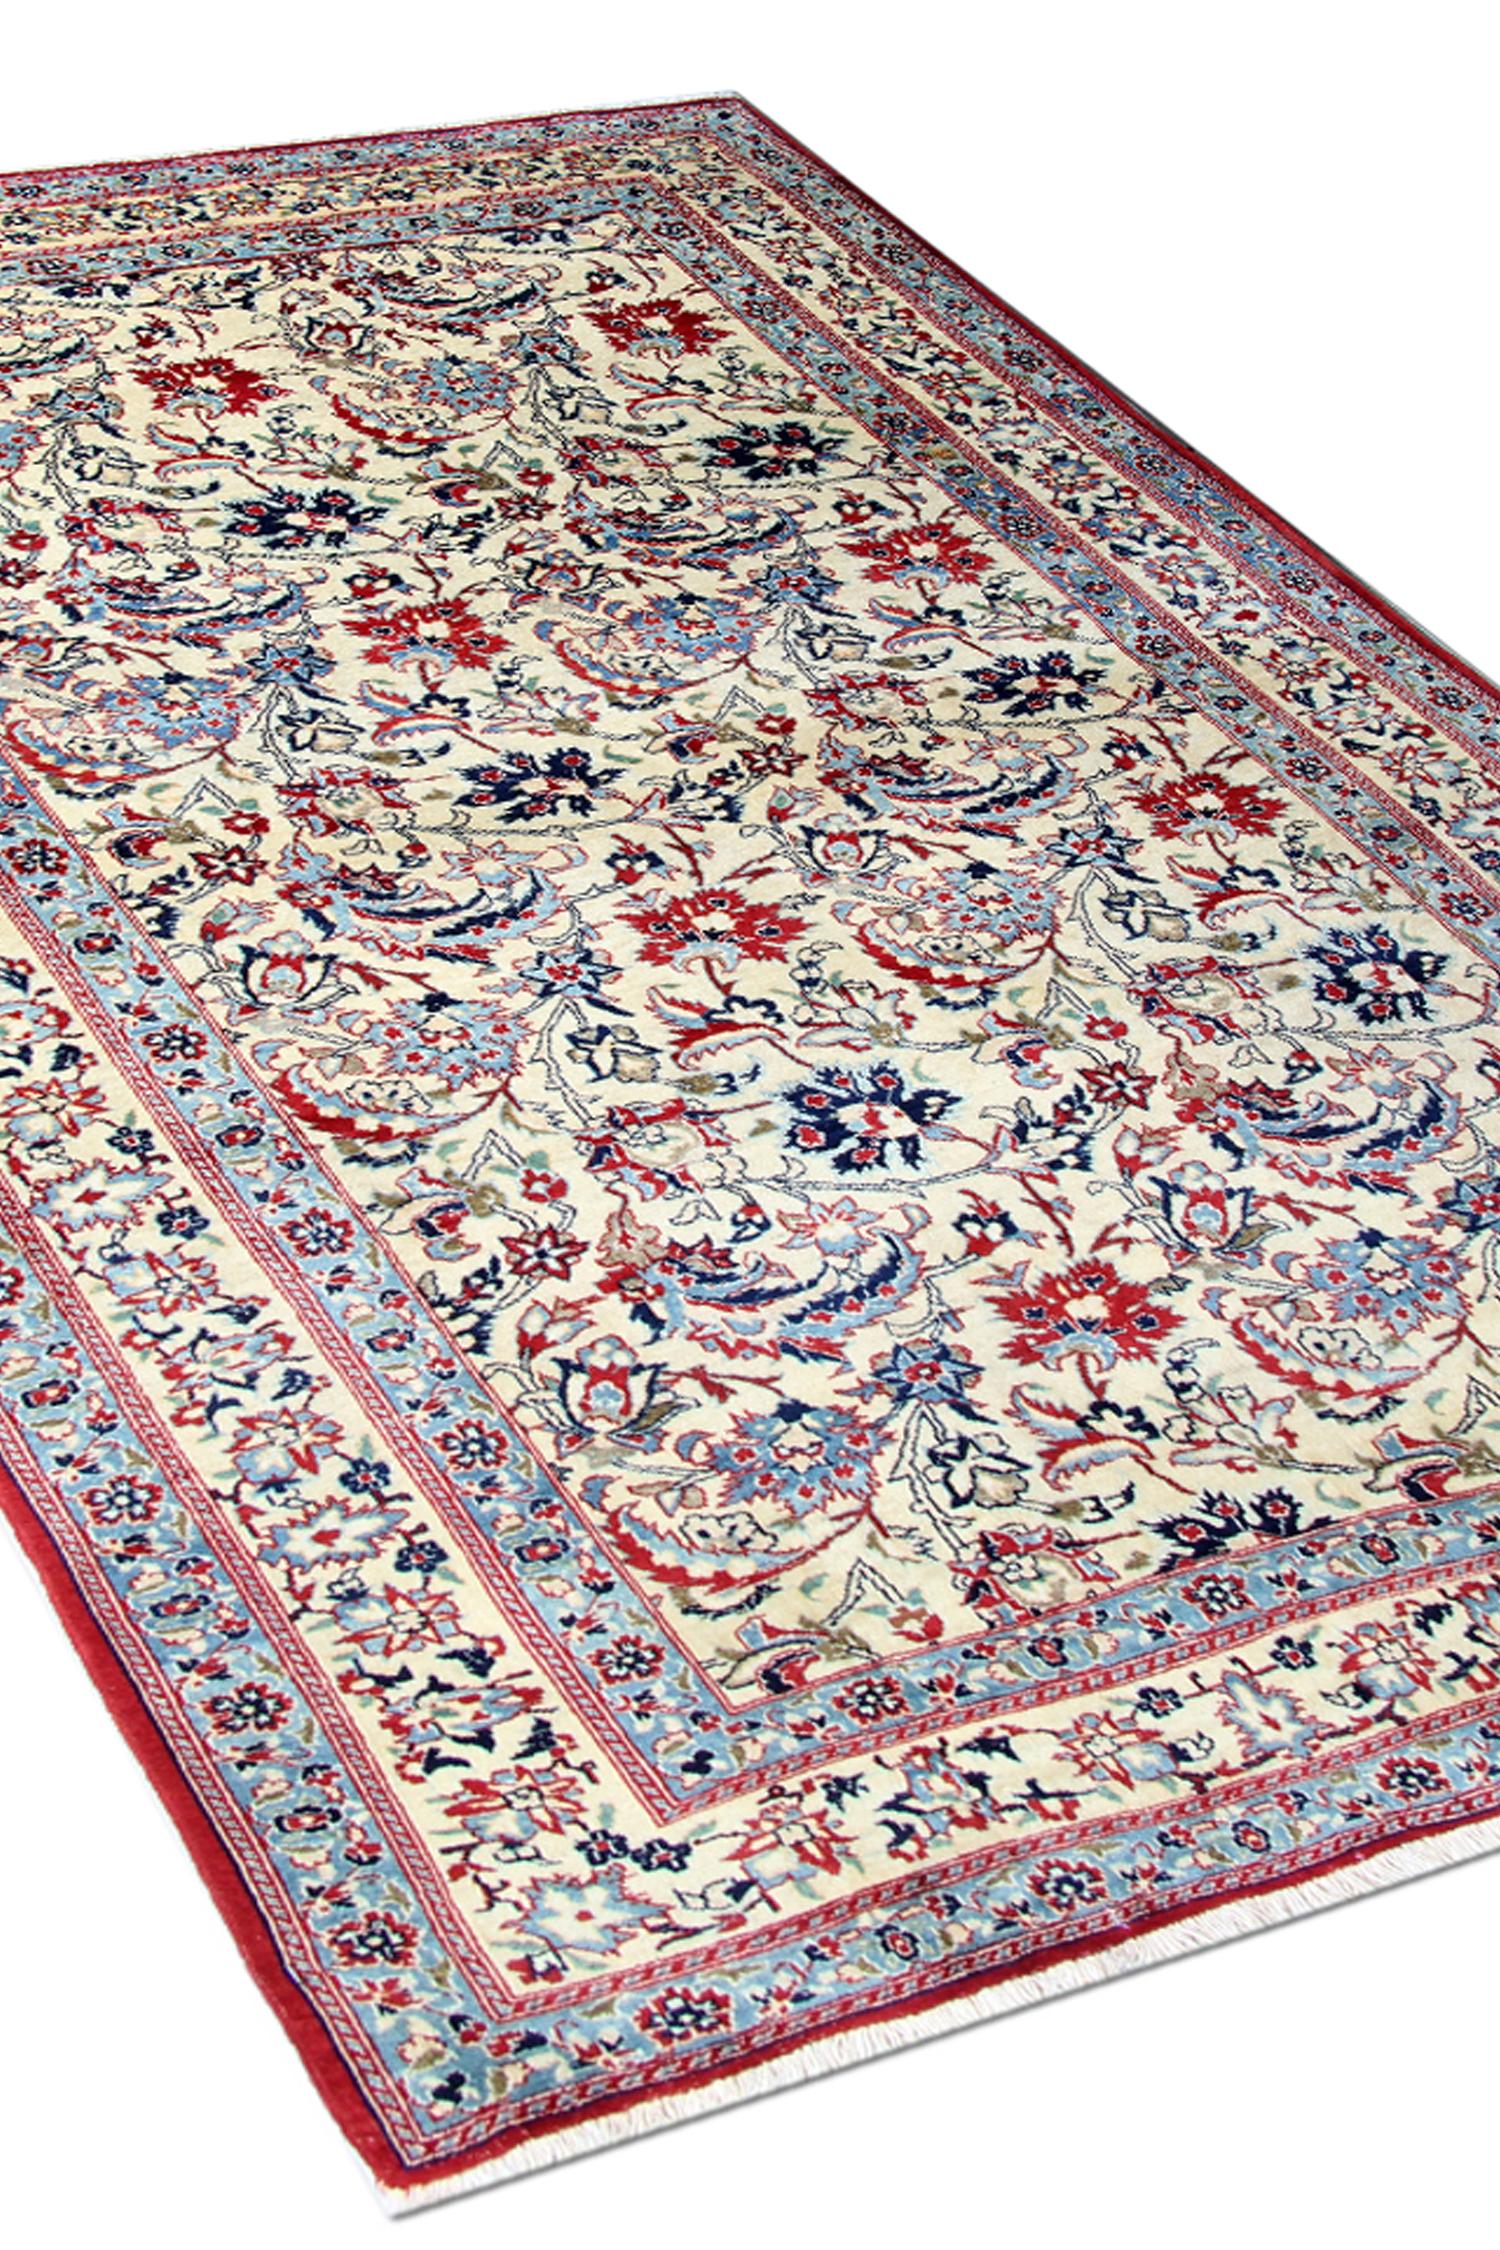 This is an excellent example of old carpets woven in the 1920s. It features an all-over floral design in perfect condition. The design features a bold colour combination of red and blue accents that elegantly contrast against the cream field upon